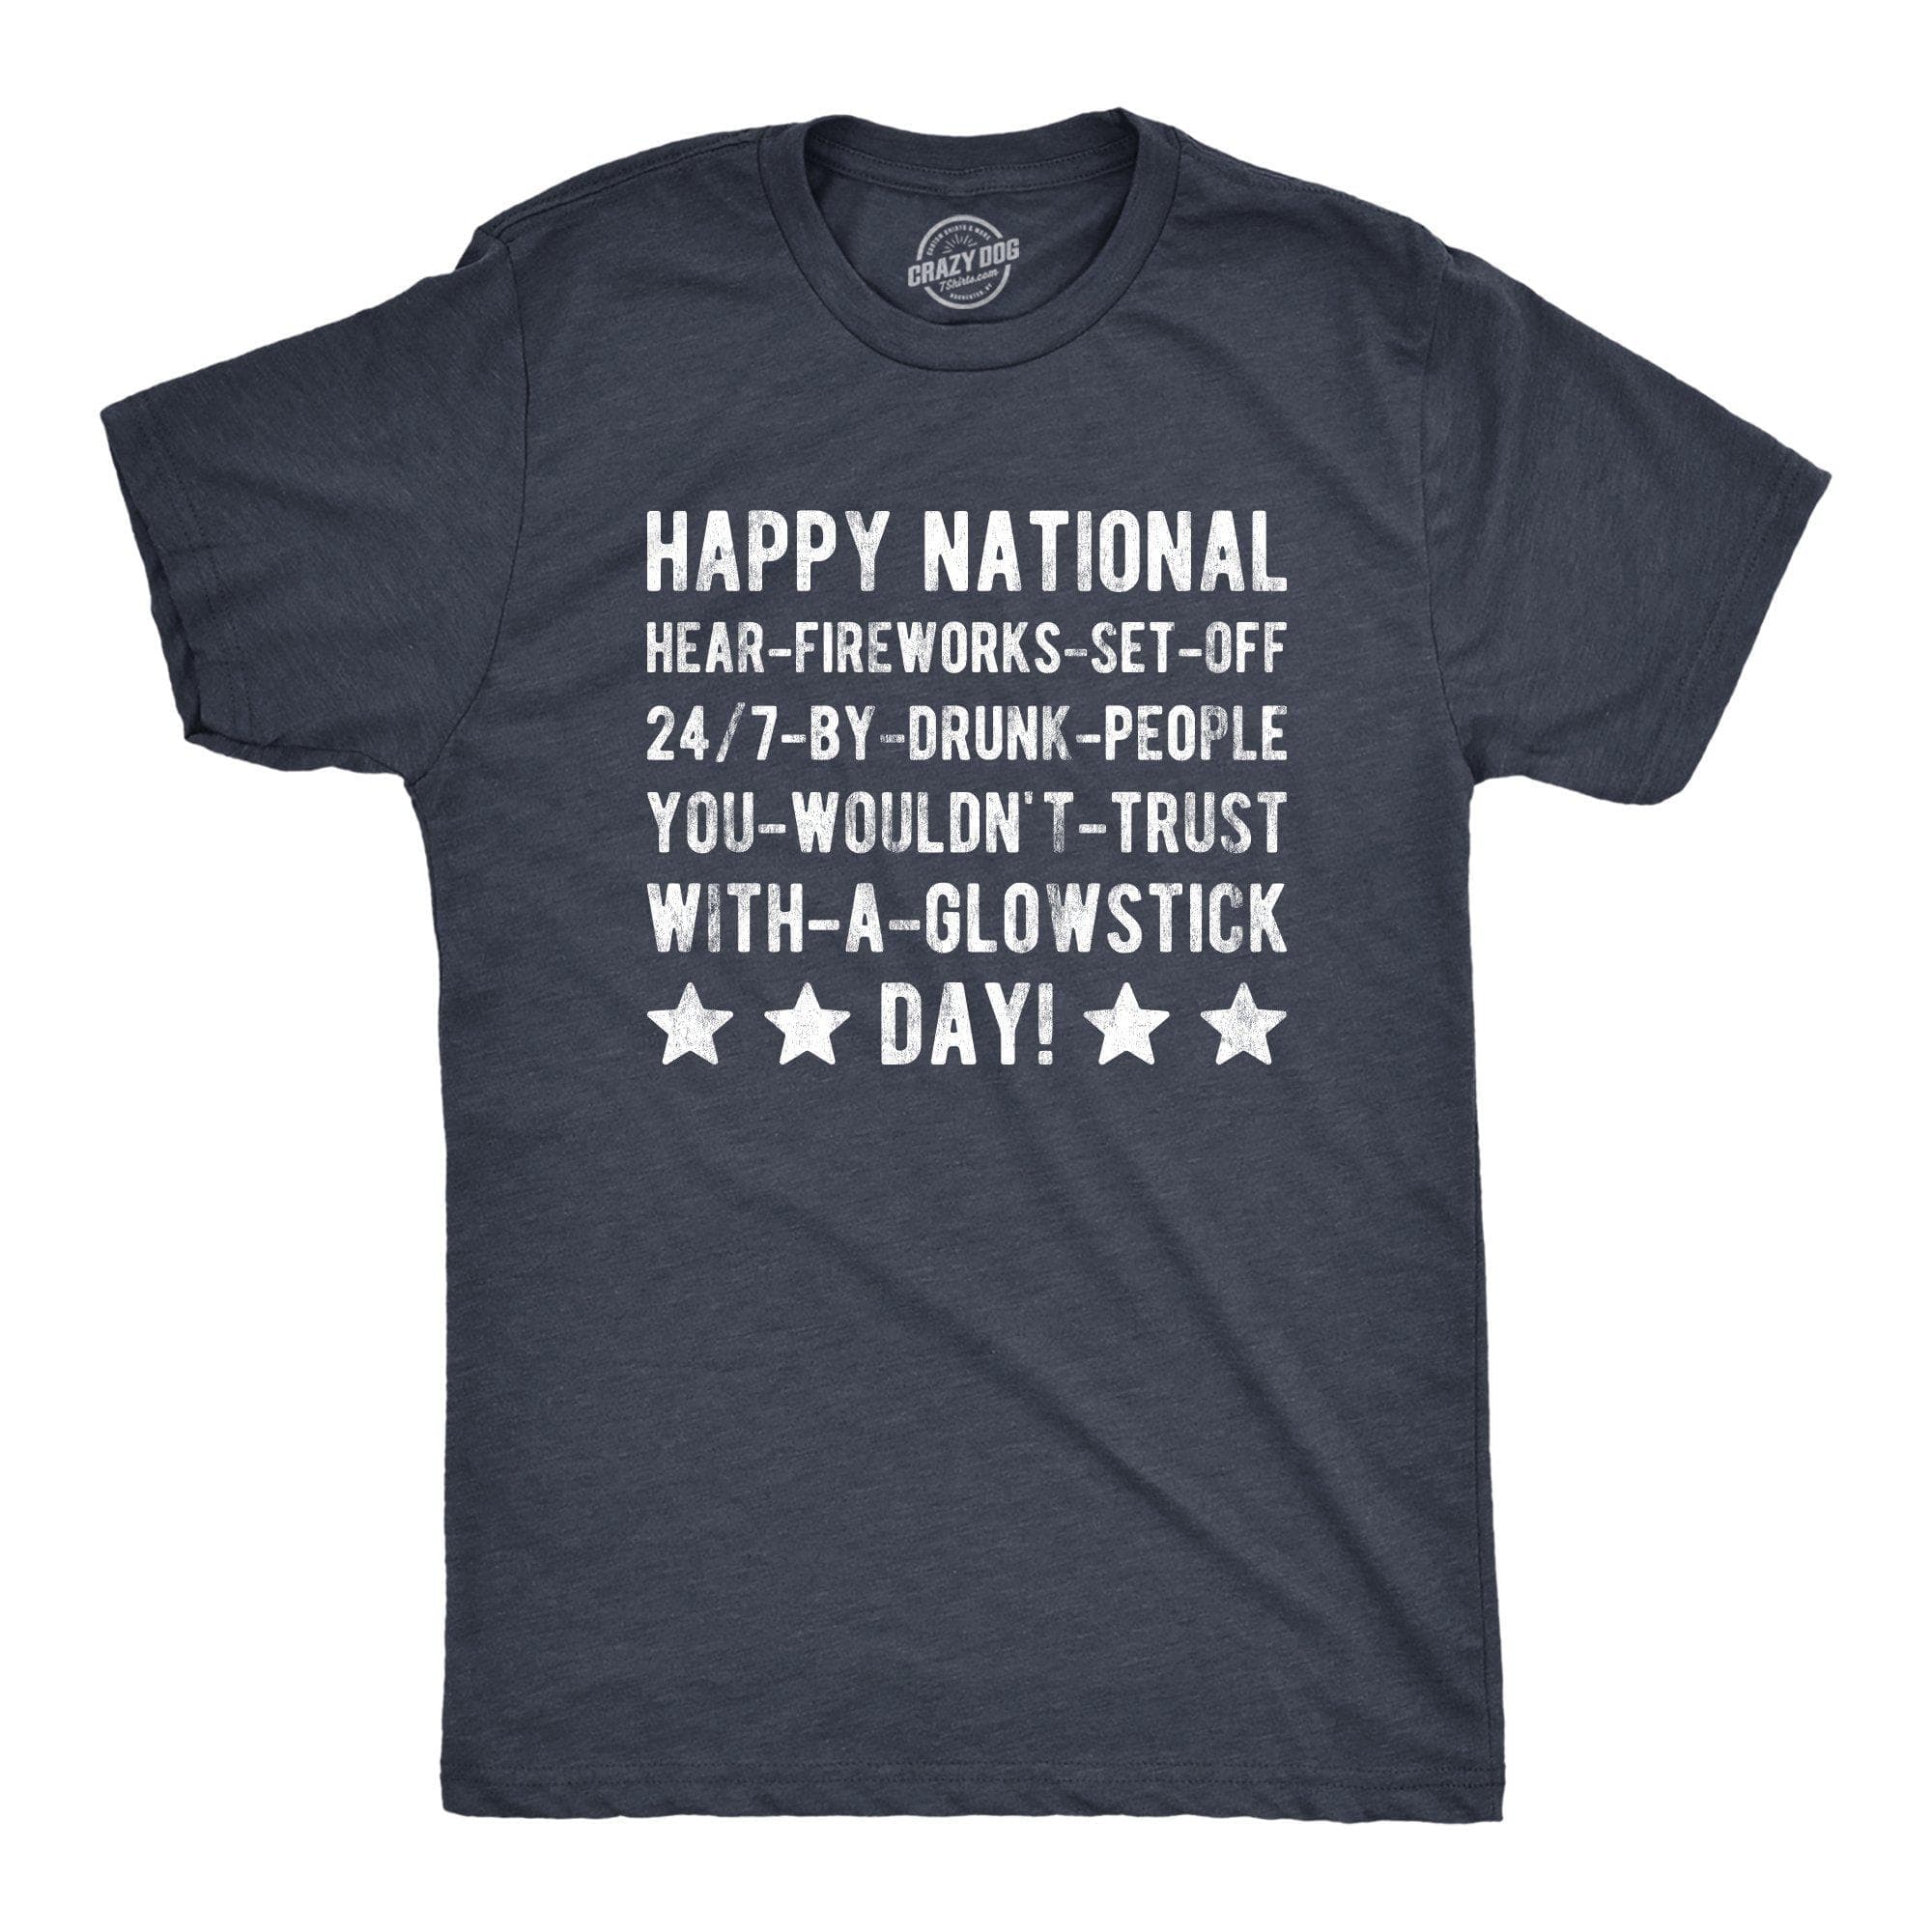 Happy National Fireworks Set Off By Drunk People Day Men's Tshirt - Crazy Dog T-Shirts